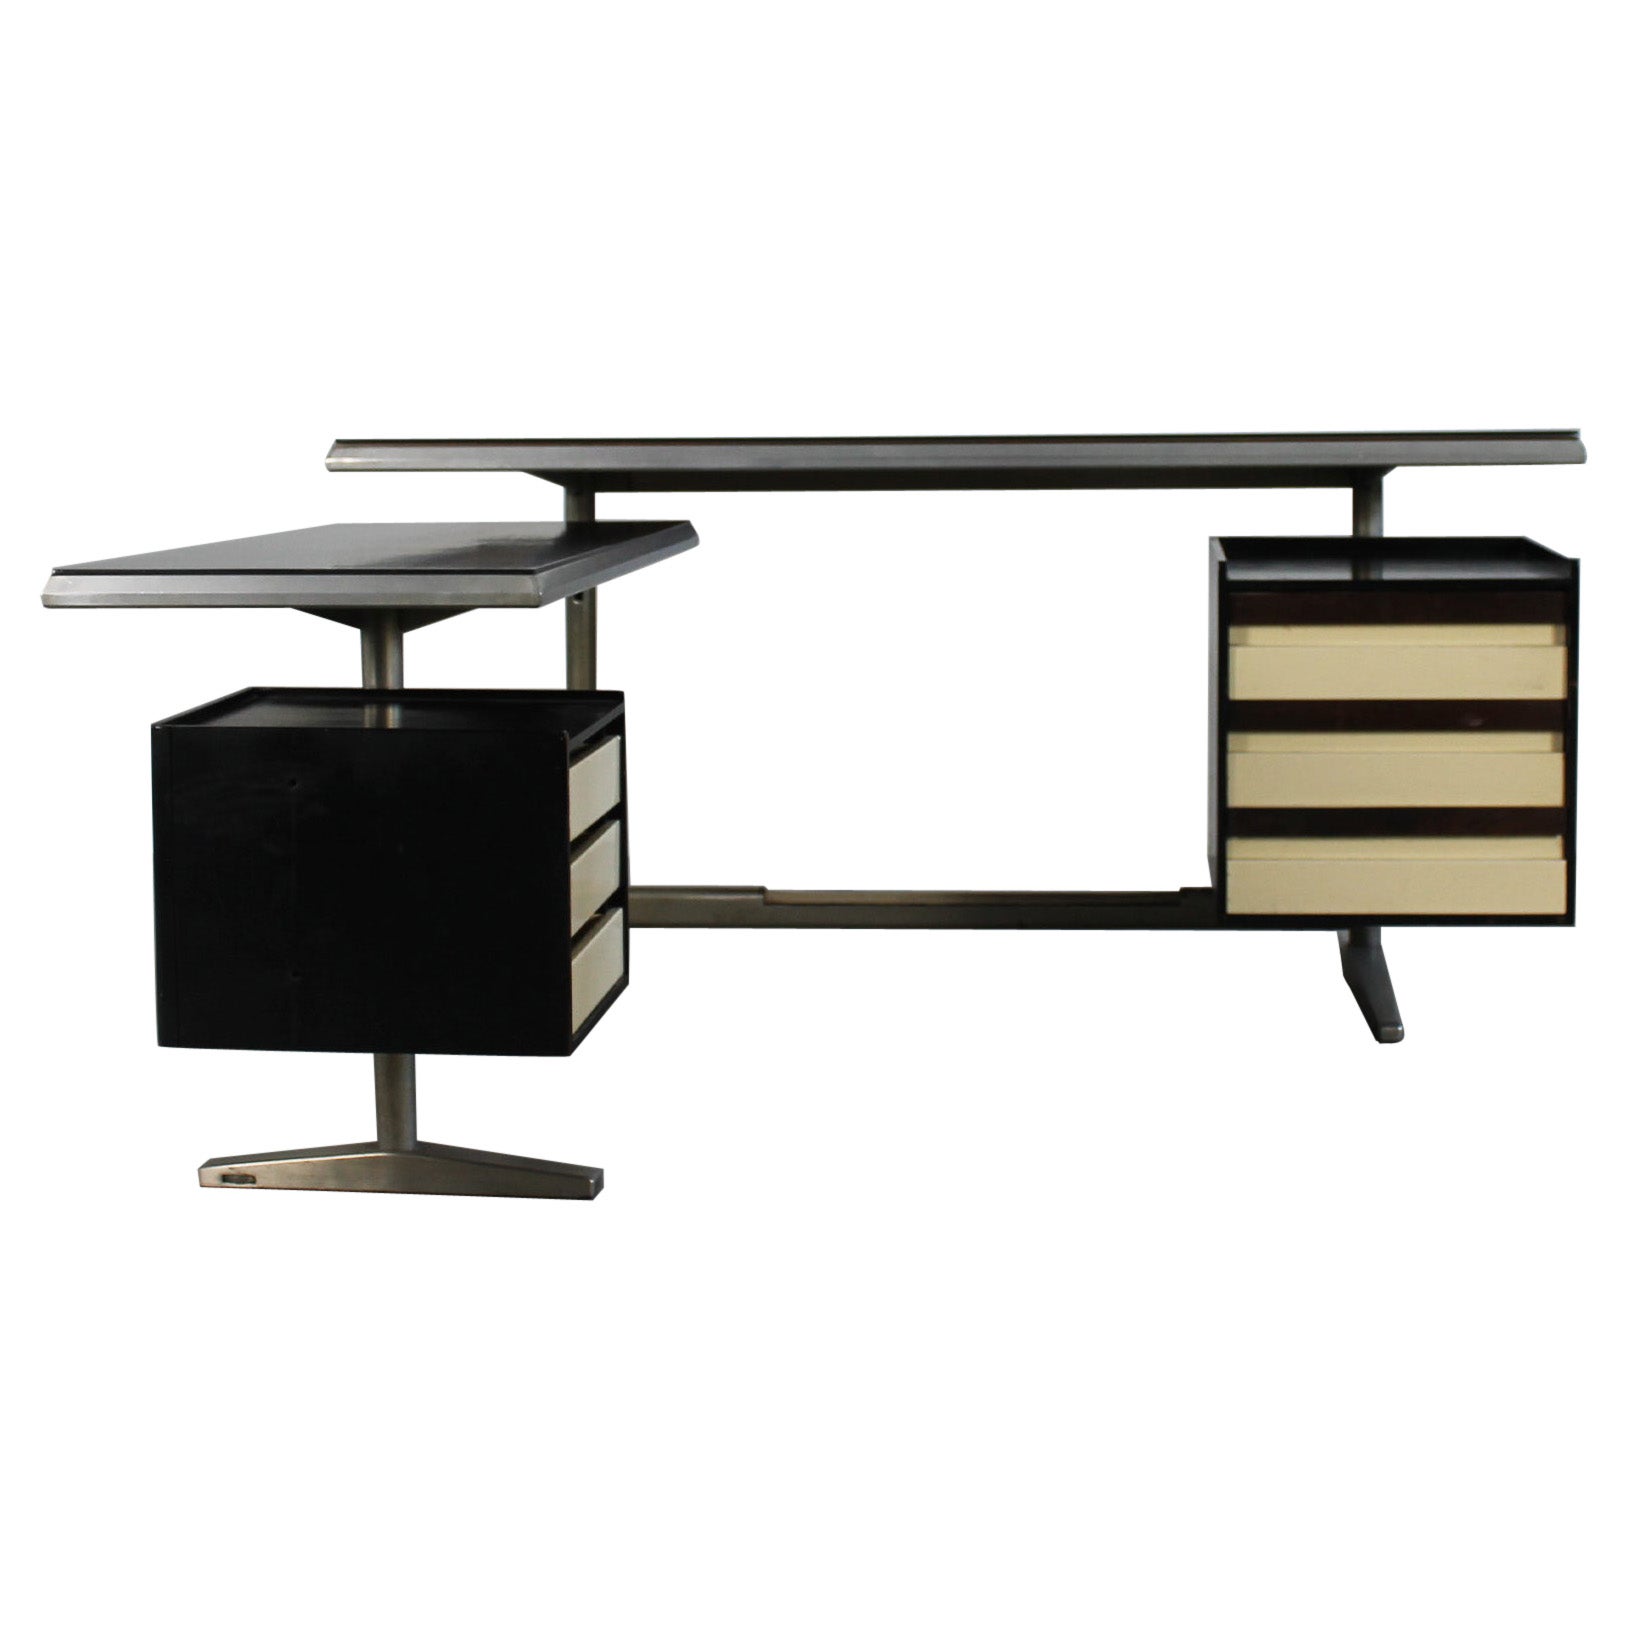 Studio PFR Office Desk with Drawers in Metal and Wood by Rima 1965 Italy